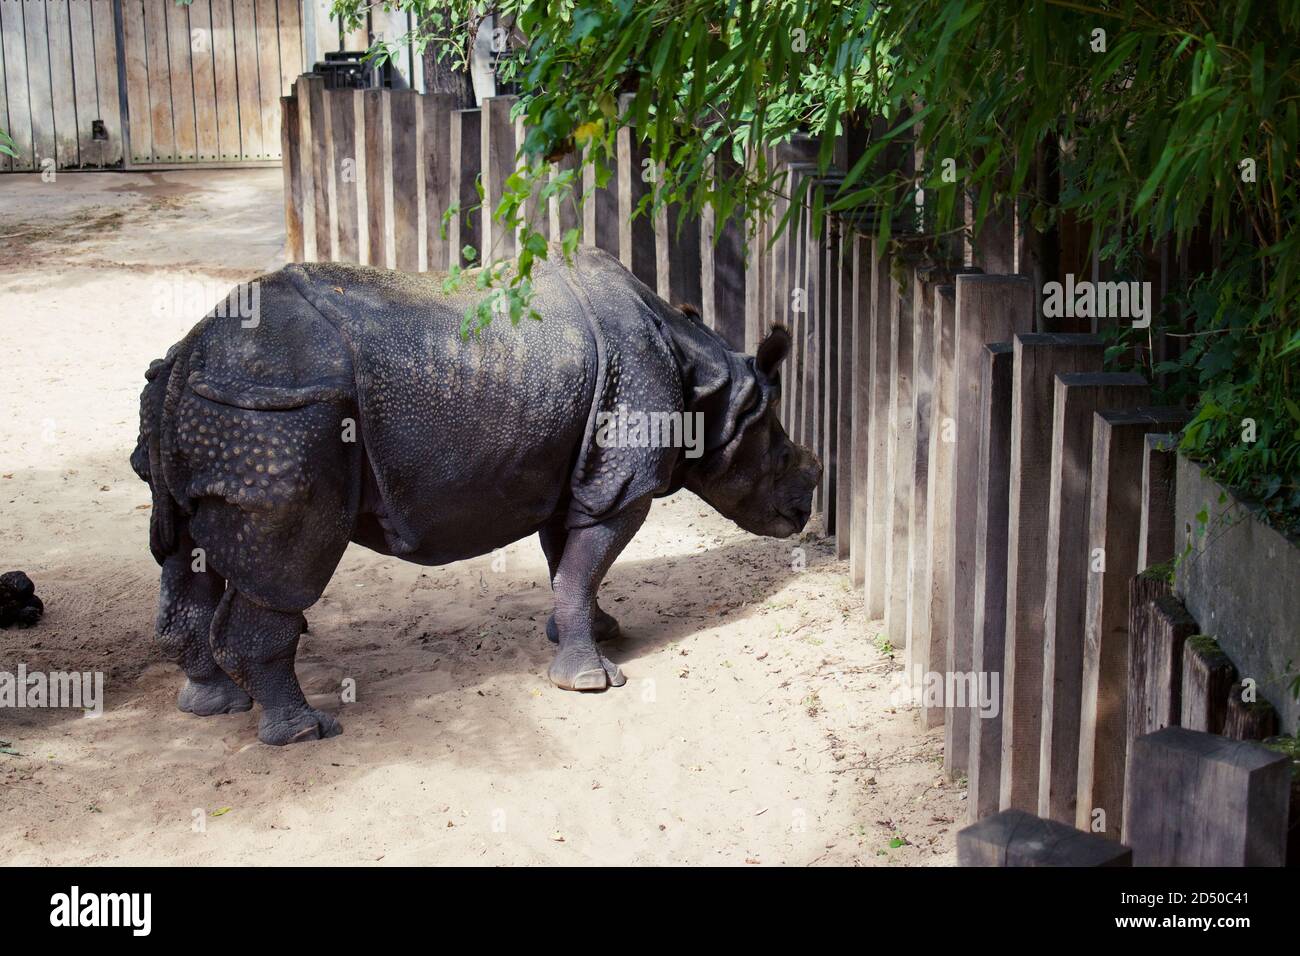 Rhino in Zoo enclosure with horn shaved down Stock Photo